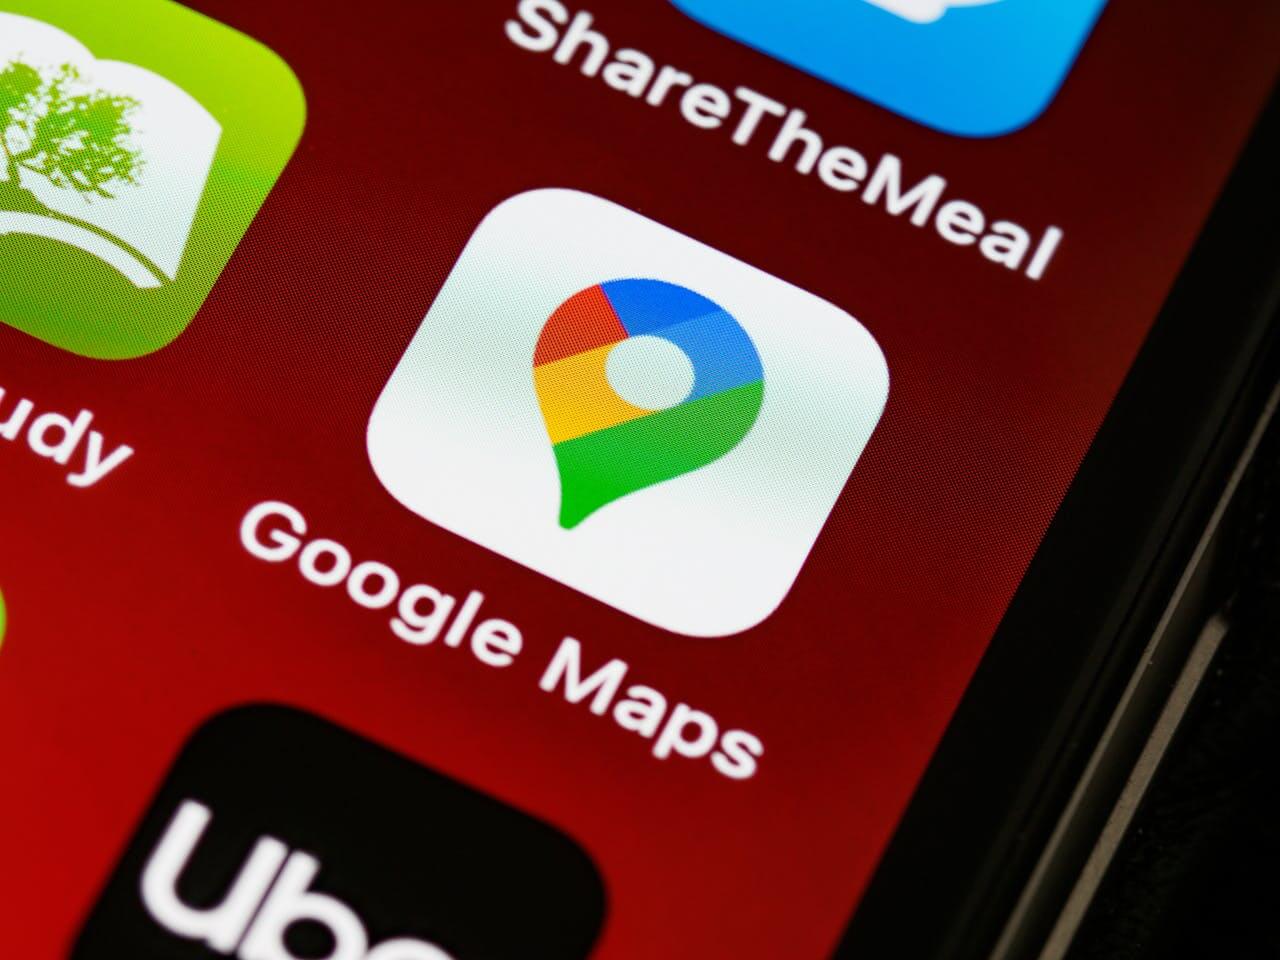 Android users will no longer use Phone App searches on Google Maps